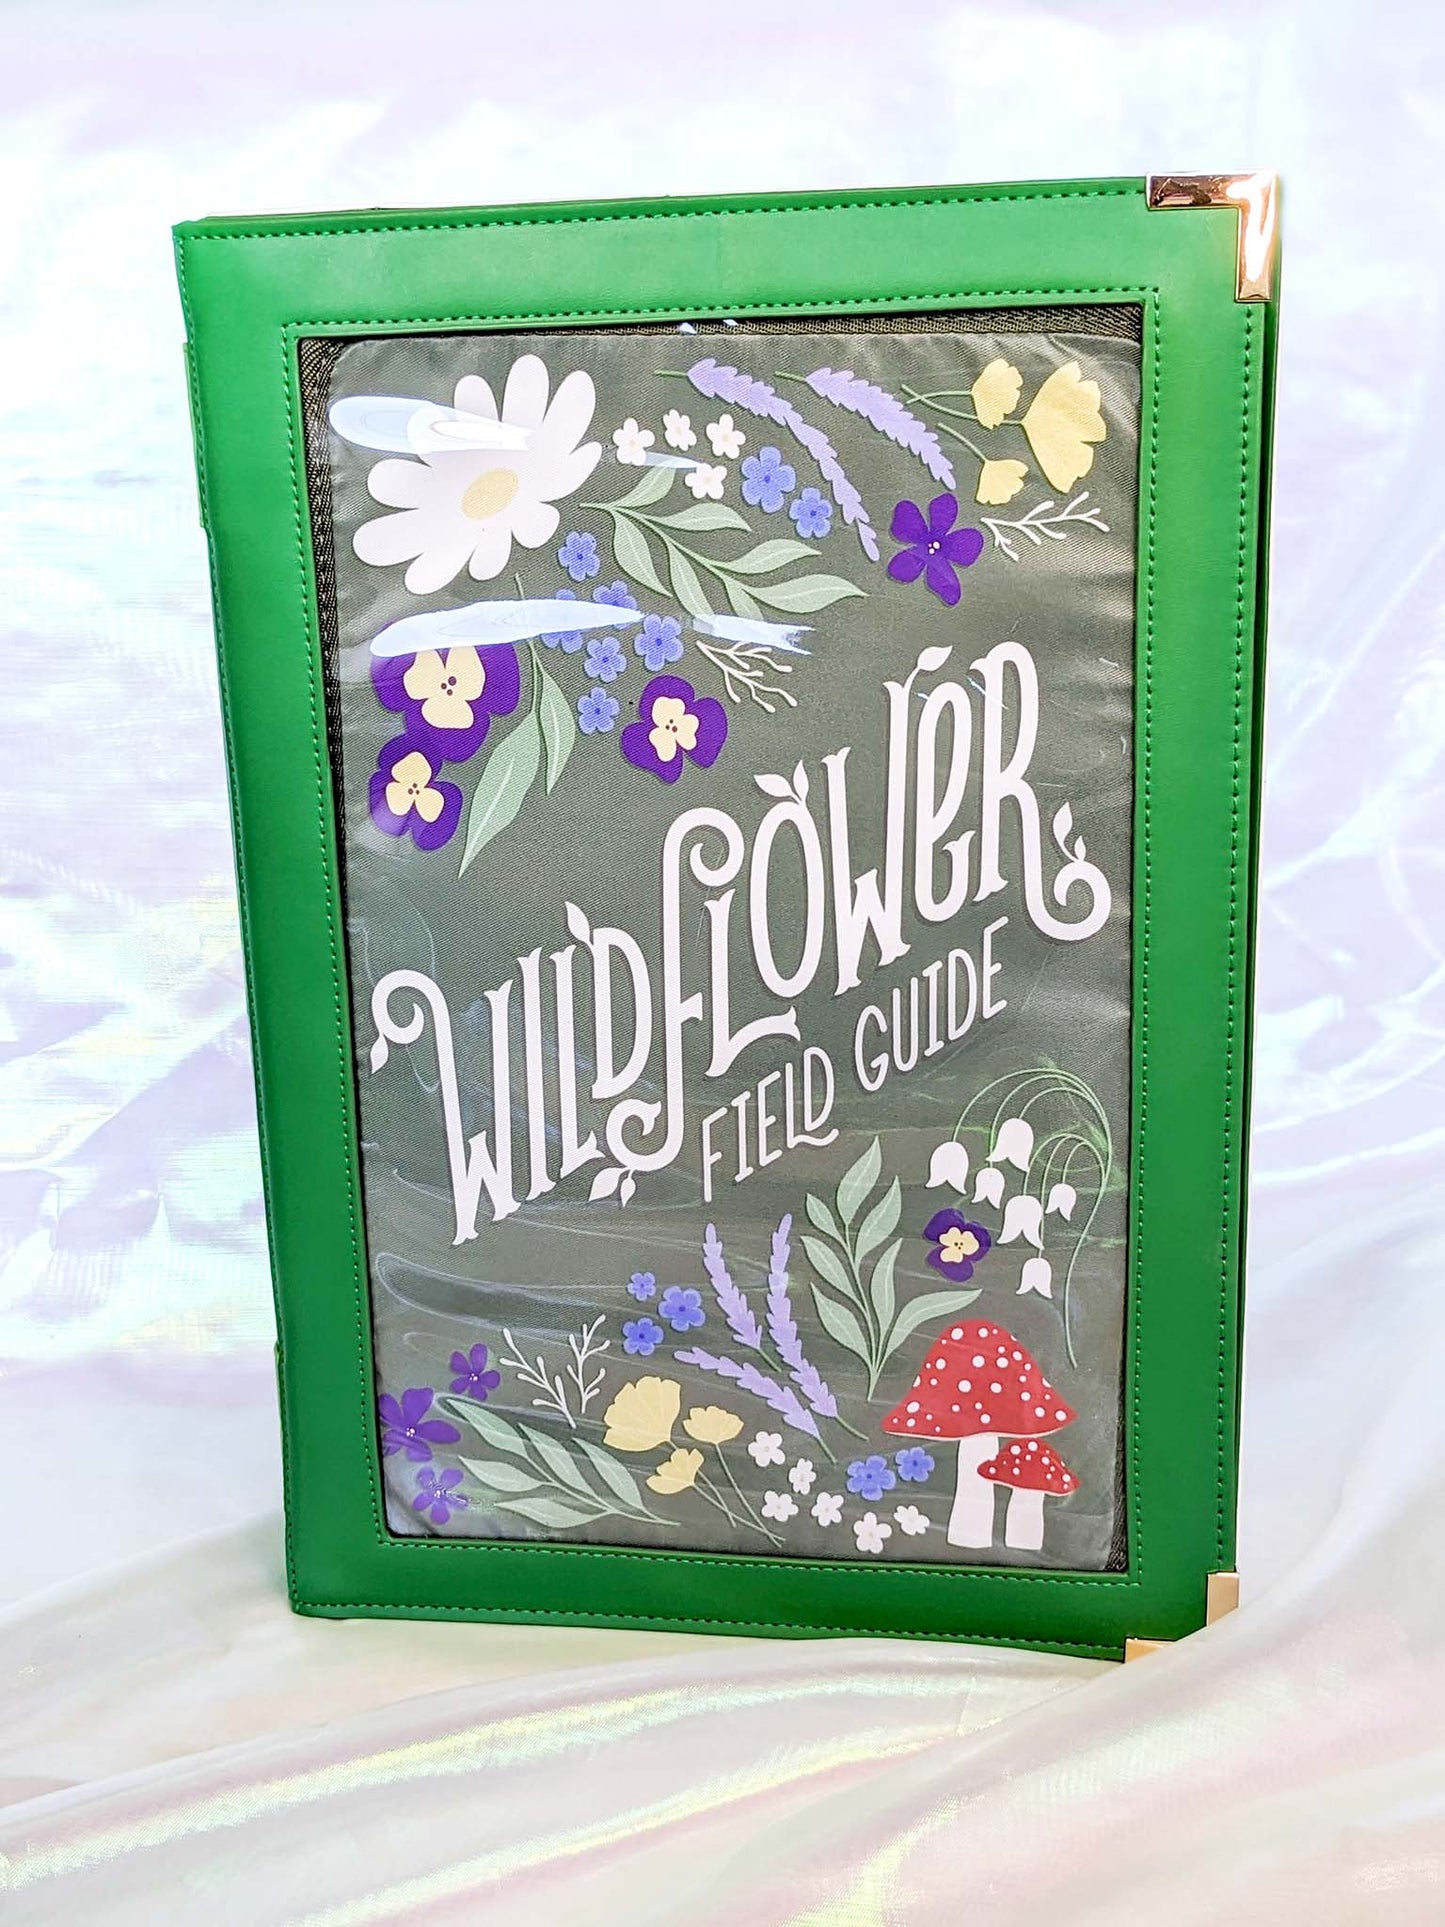 Bookish Ita Messenger Bag Backpack Cottagecore Green Wildflower Guide